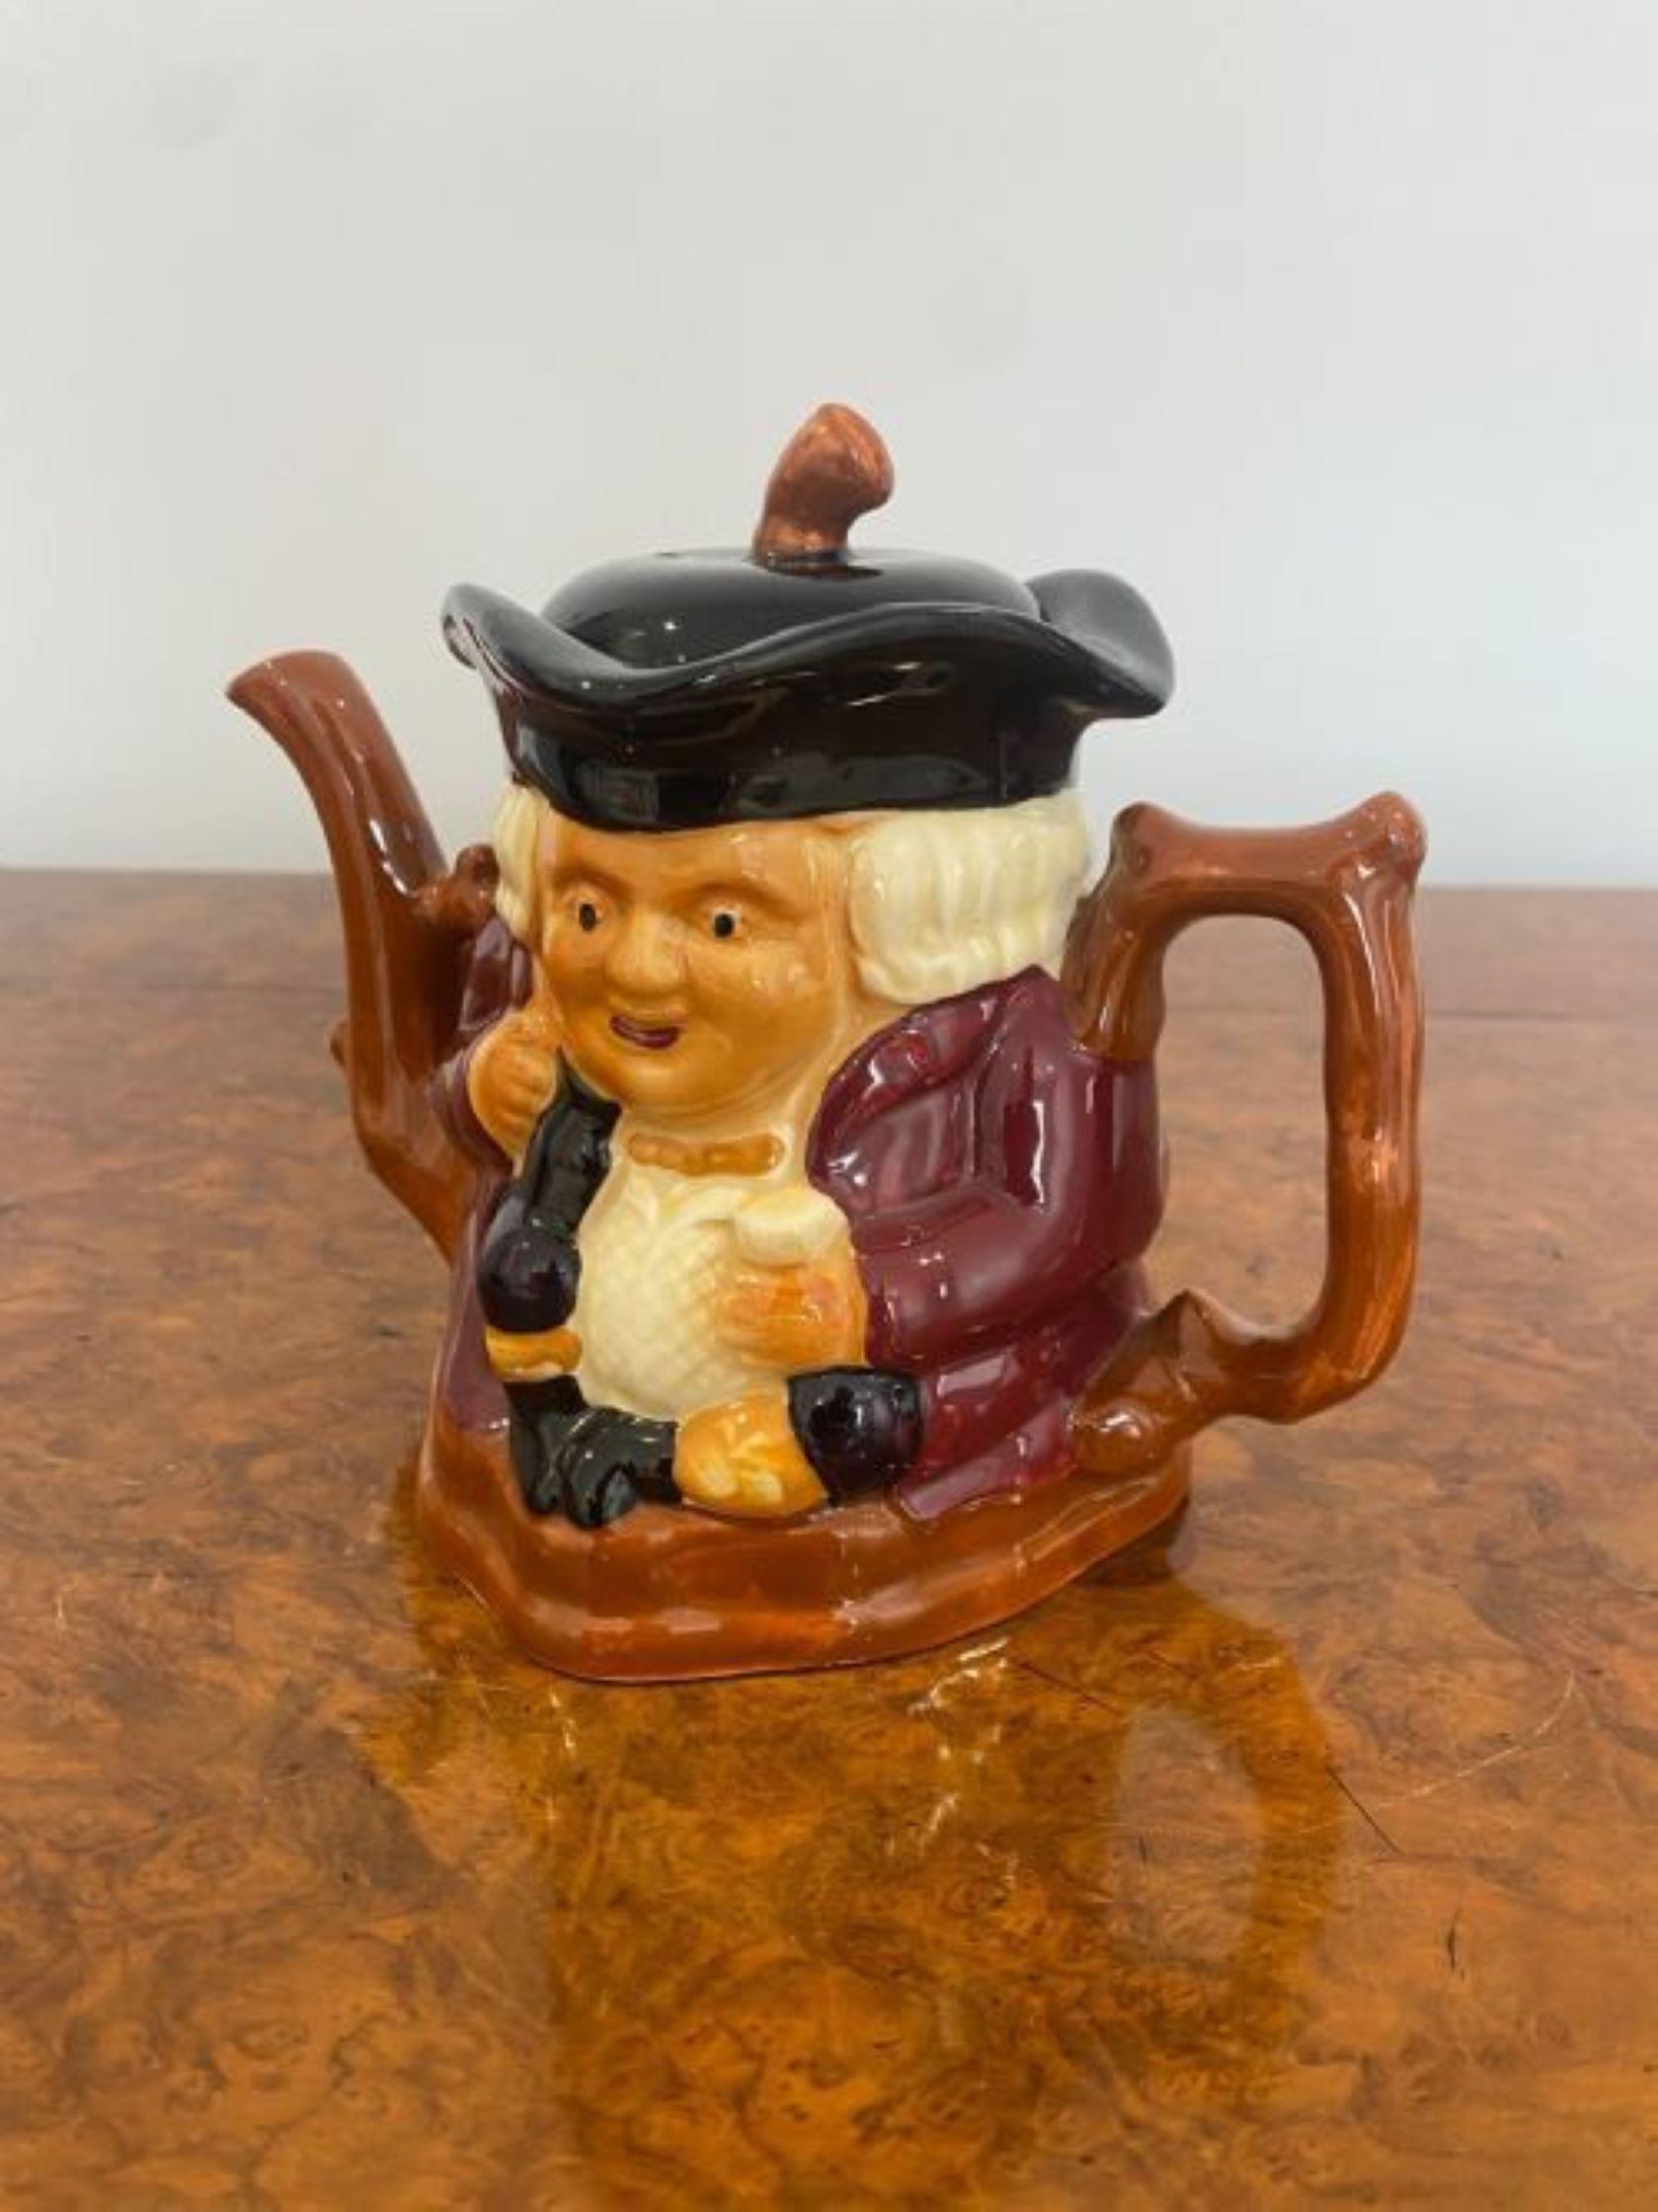 Unusual antique Edwardian toby jug teapot having a quality teapot with a man sitting down, shaped handle and spout and original lid.